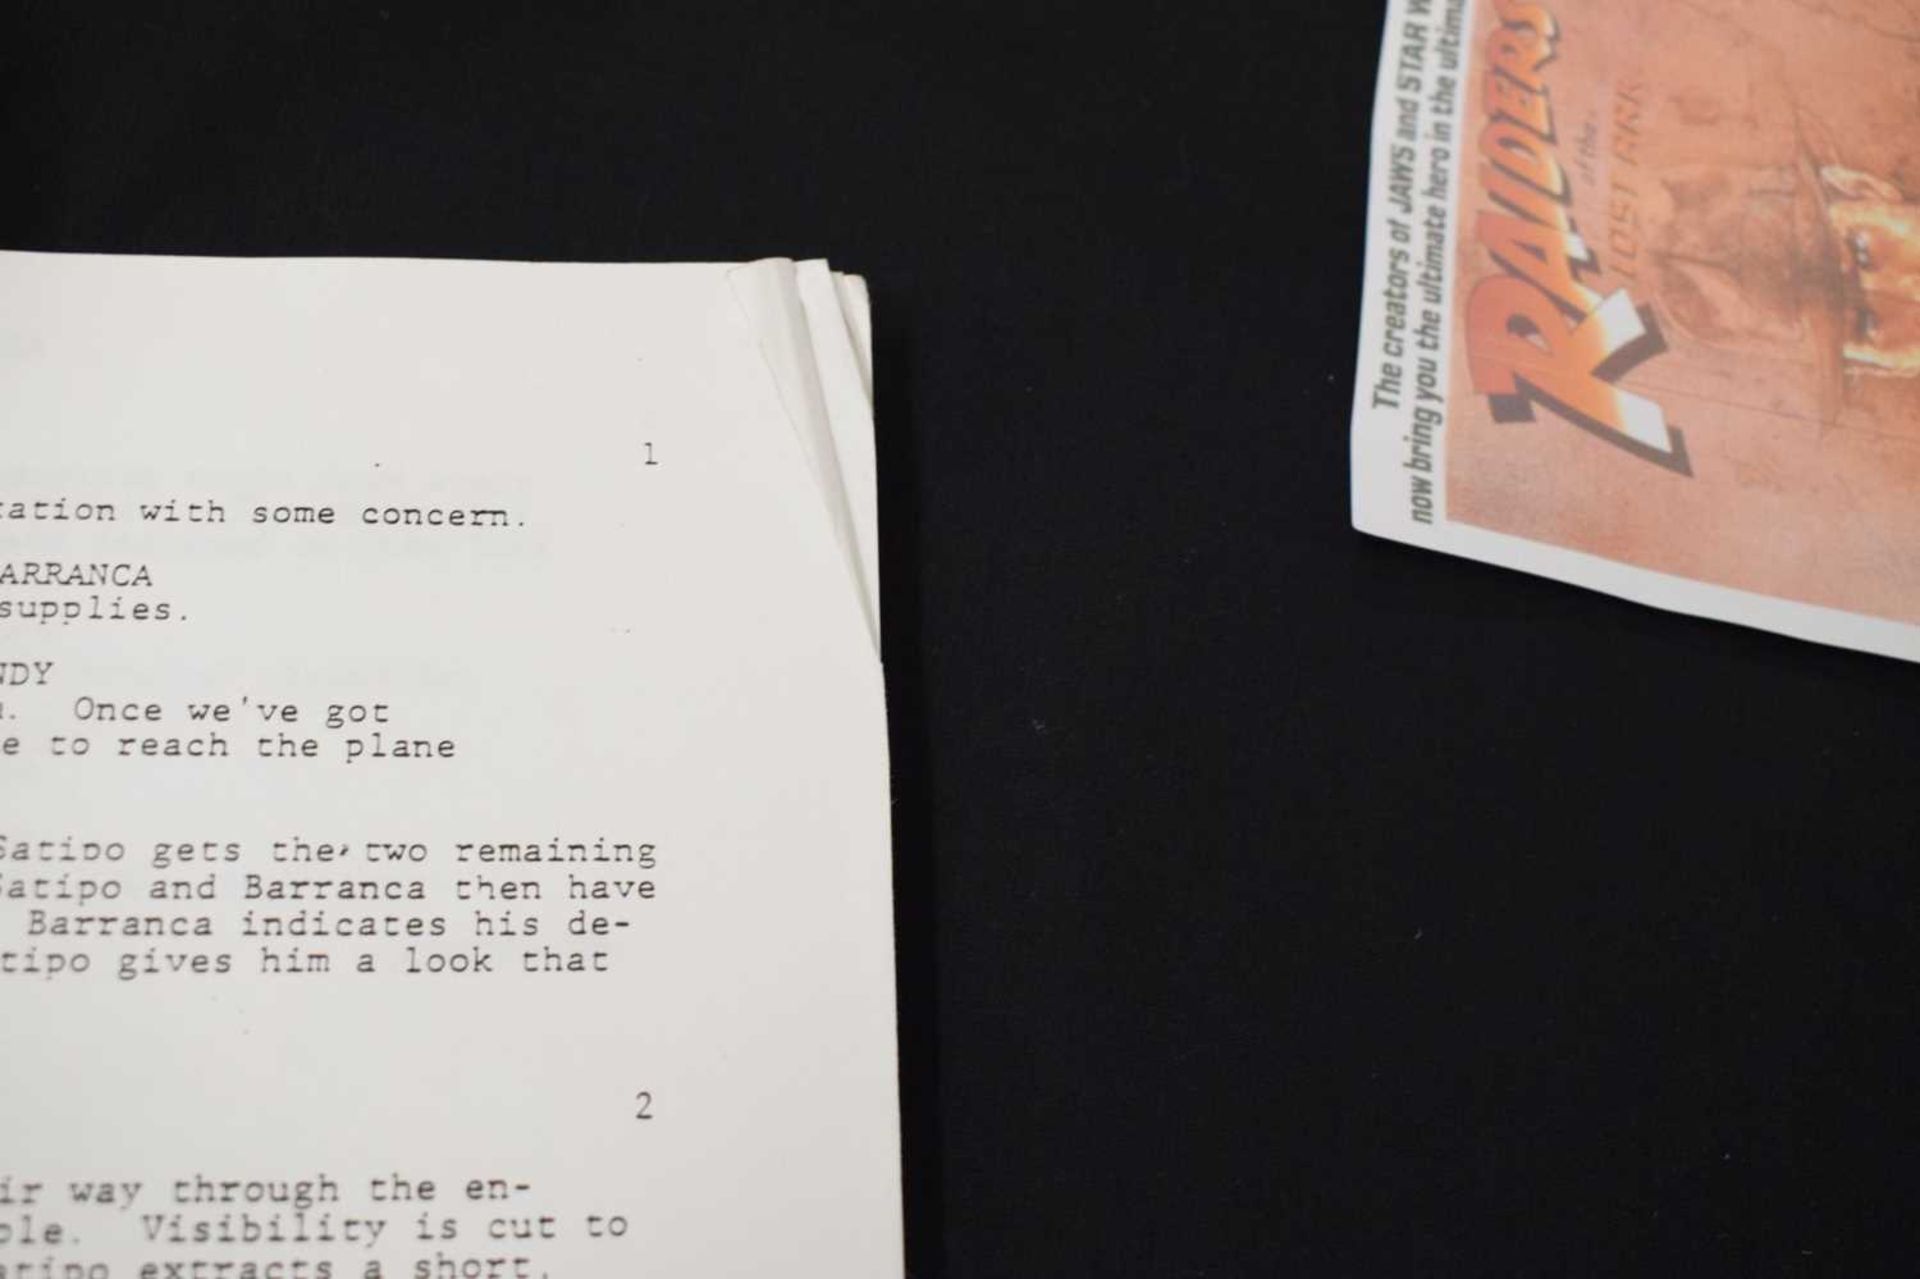 Raiders of the Lost Ark (1981) draft screenplay film script - third revised edition - Image 5 of 10